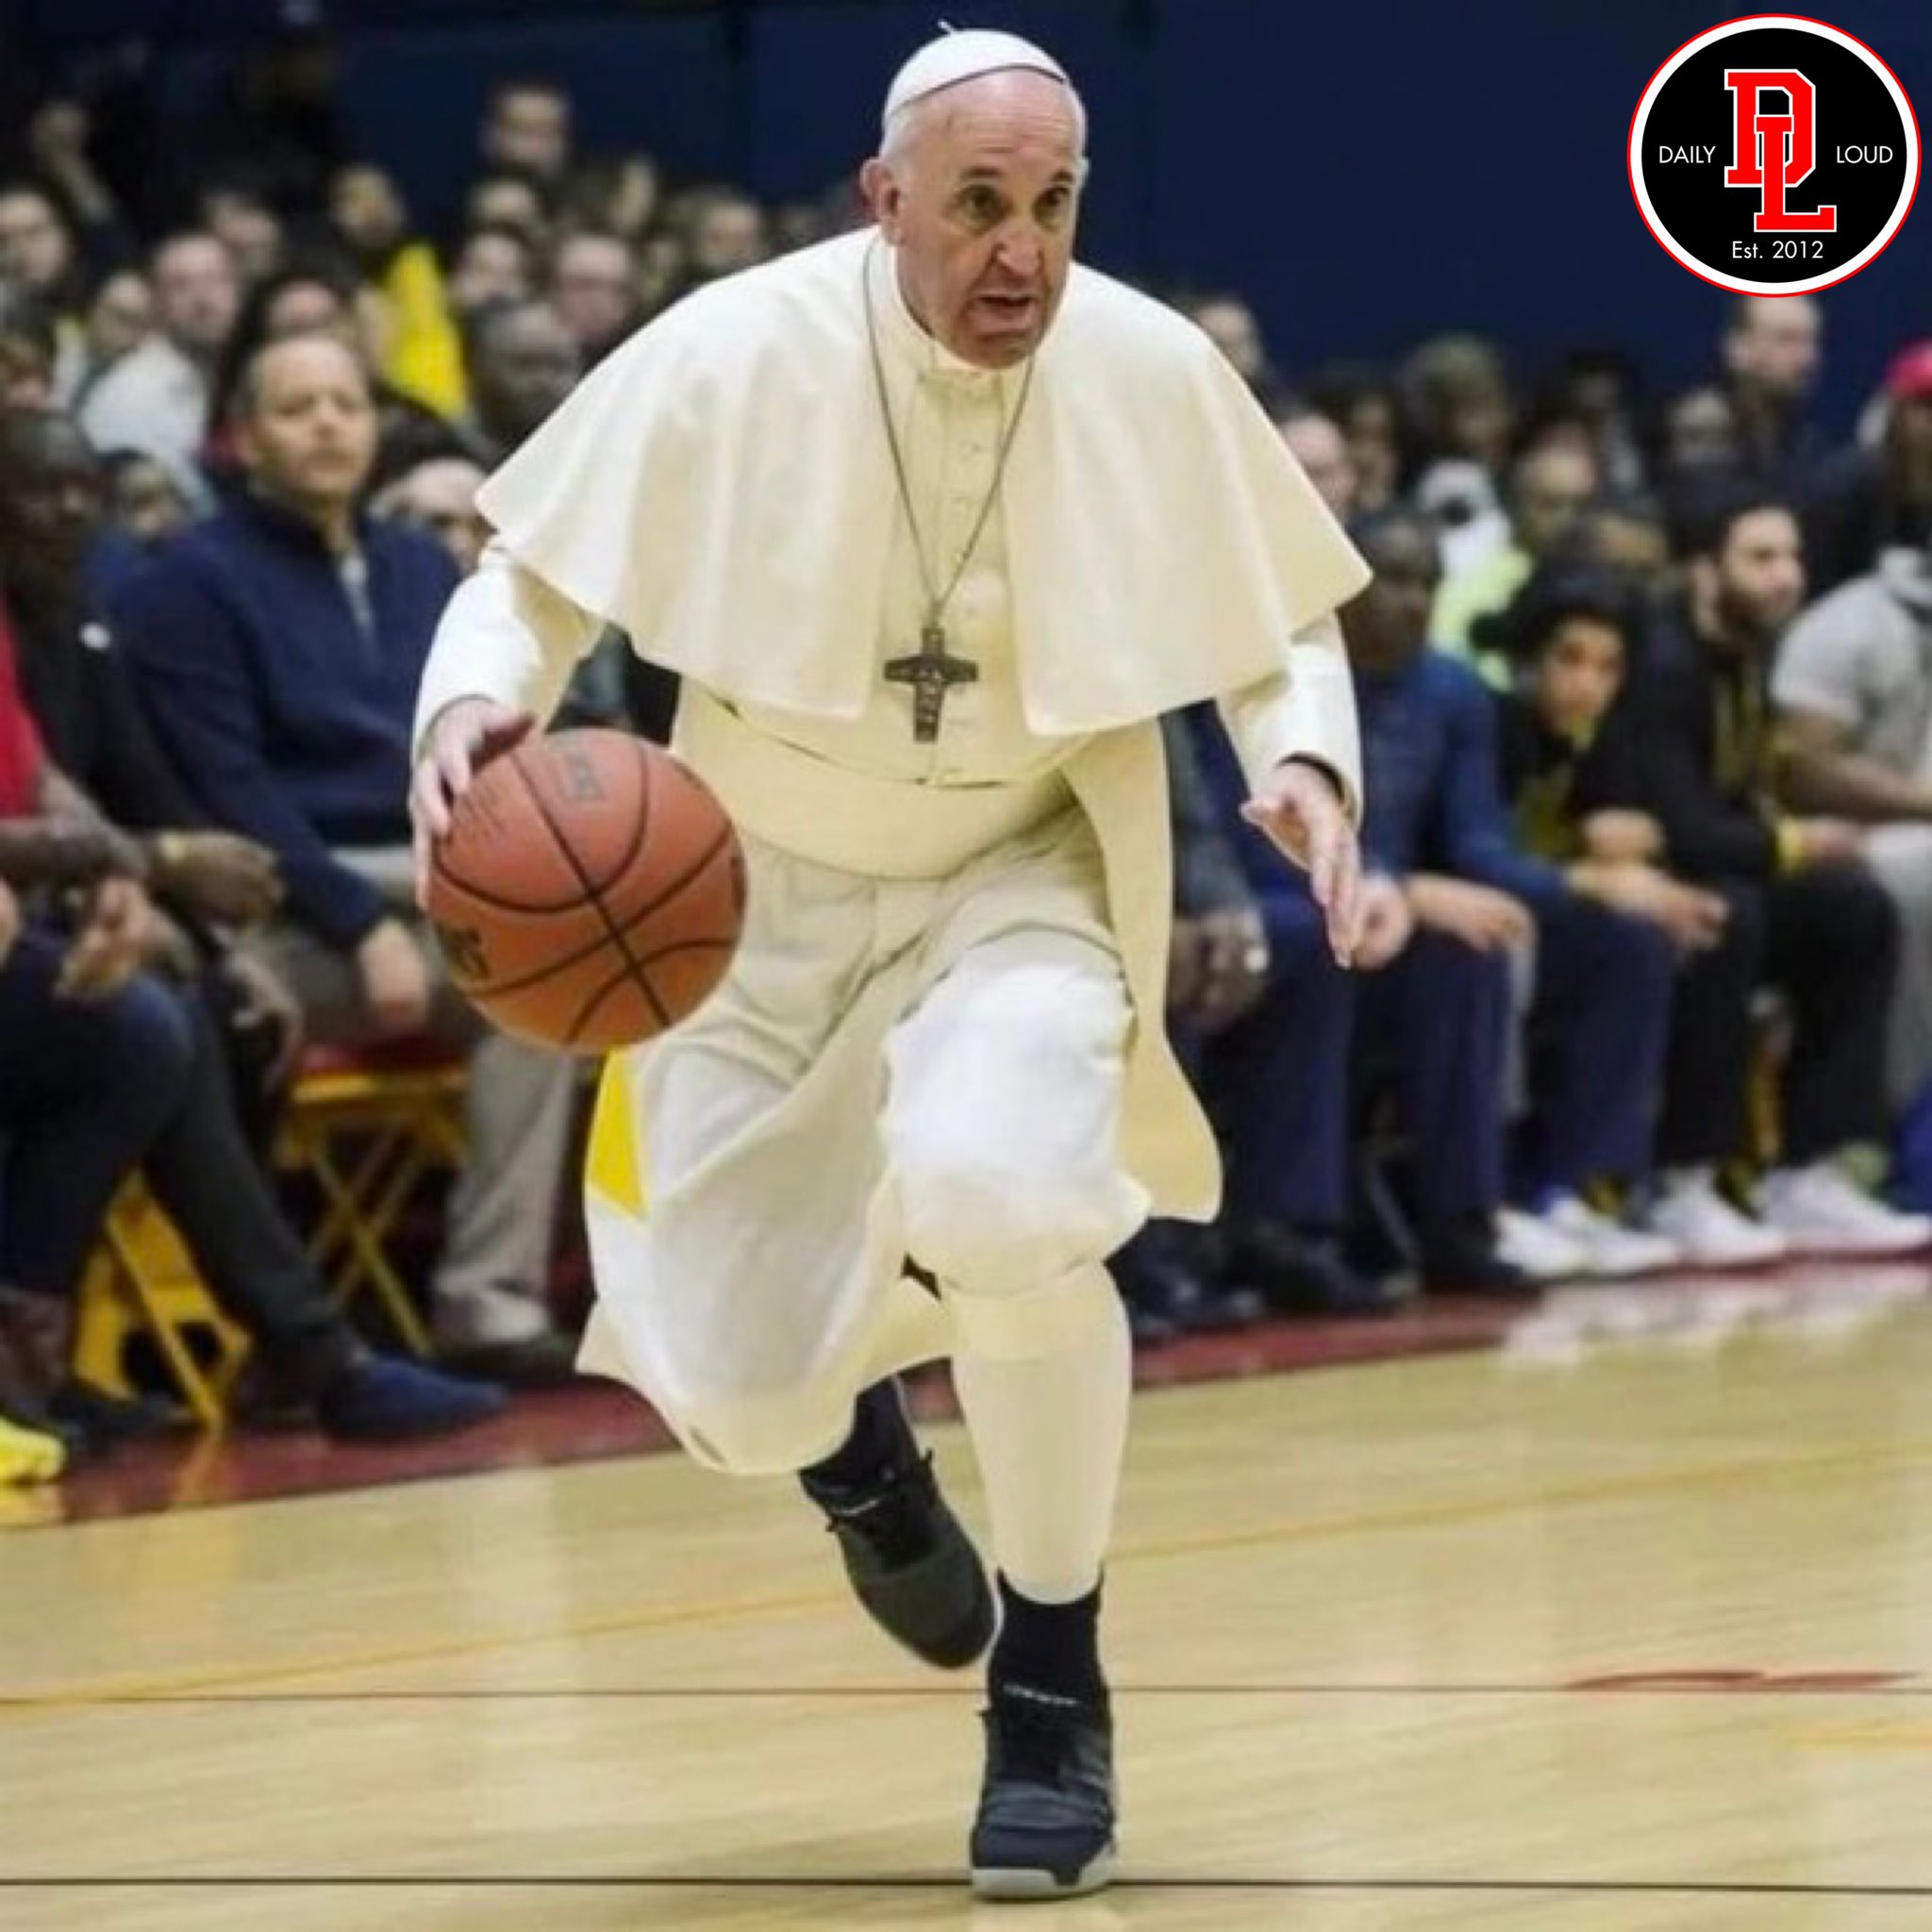 pope francis playing basketball